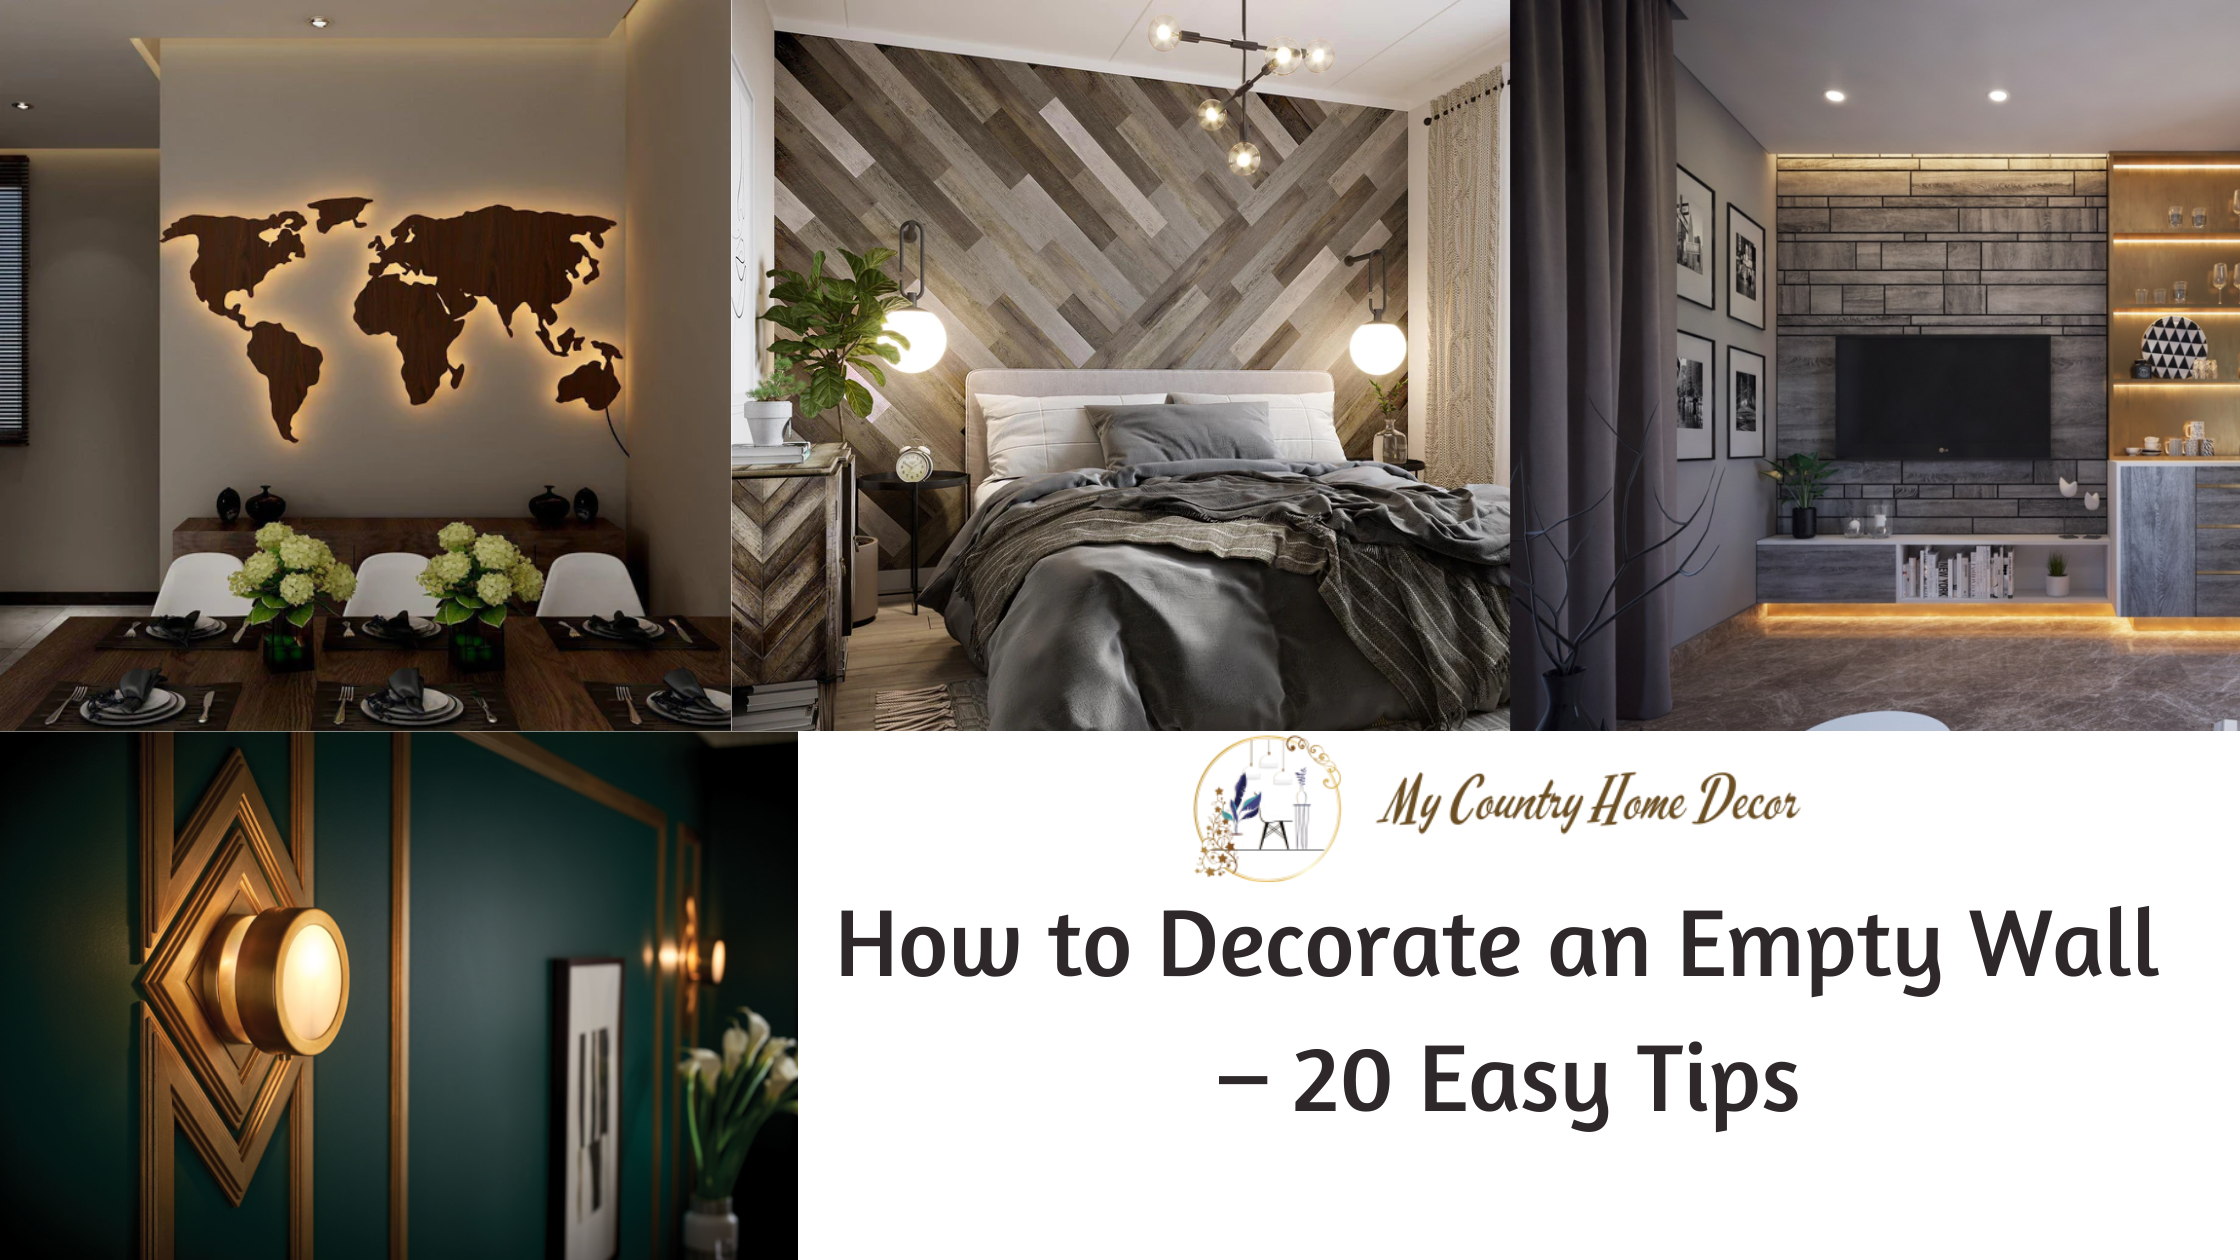 How to Decorate an Empty Wall – 20 Easy Tips